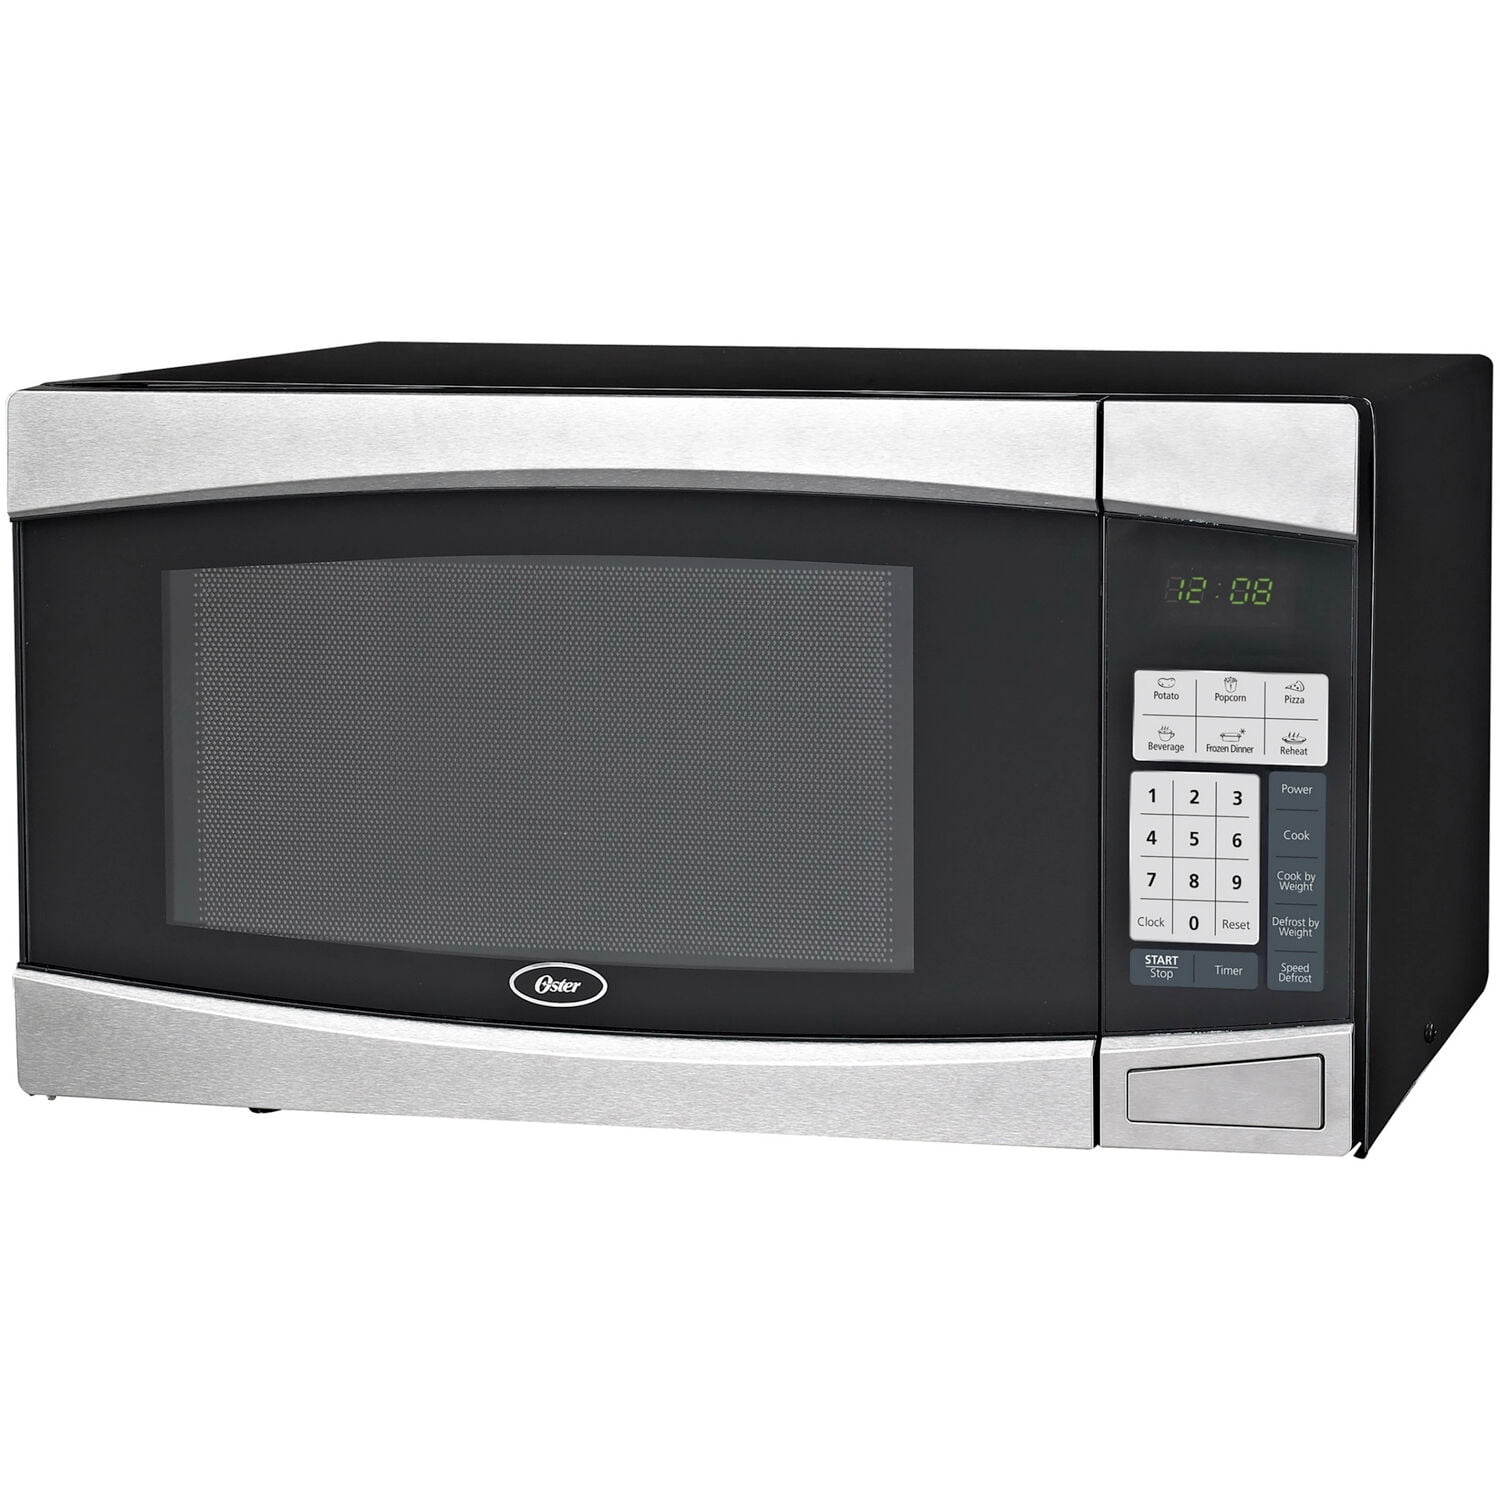 Oster 1.4 Cubic Feet Countertop Microwave Oven - Shop Microwaves & Hot  Plates at H-E-B